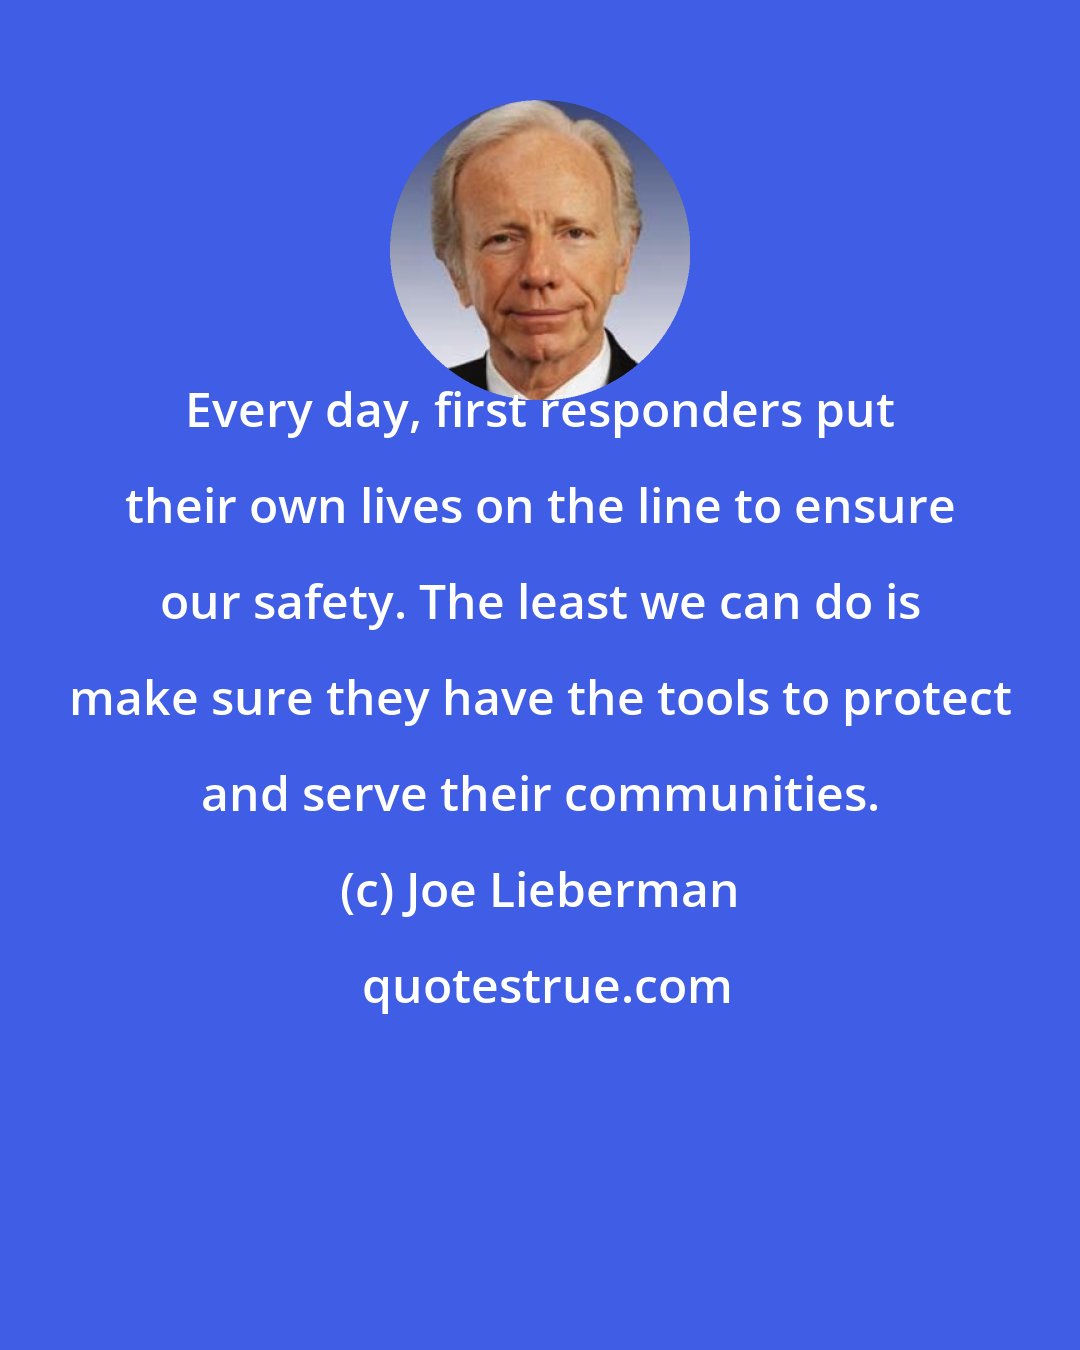 Joe Lieberman: Every day, first responders put their own lives on the line to ensure our safety. The least we can do is make sure they have the tools to protect and serve their communities.